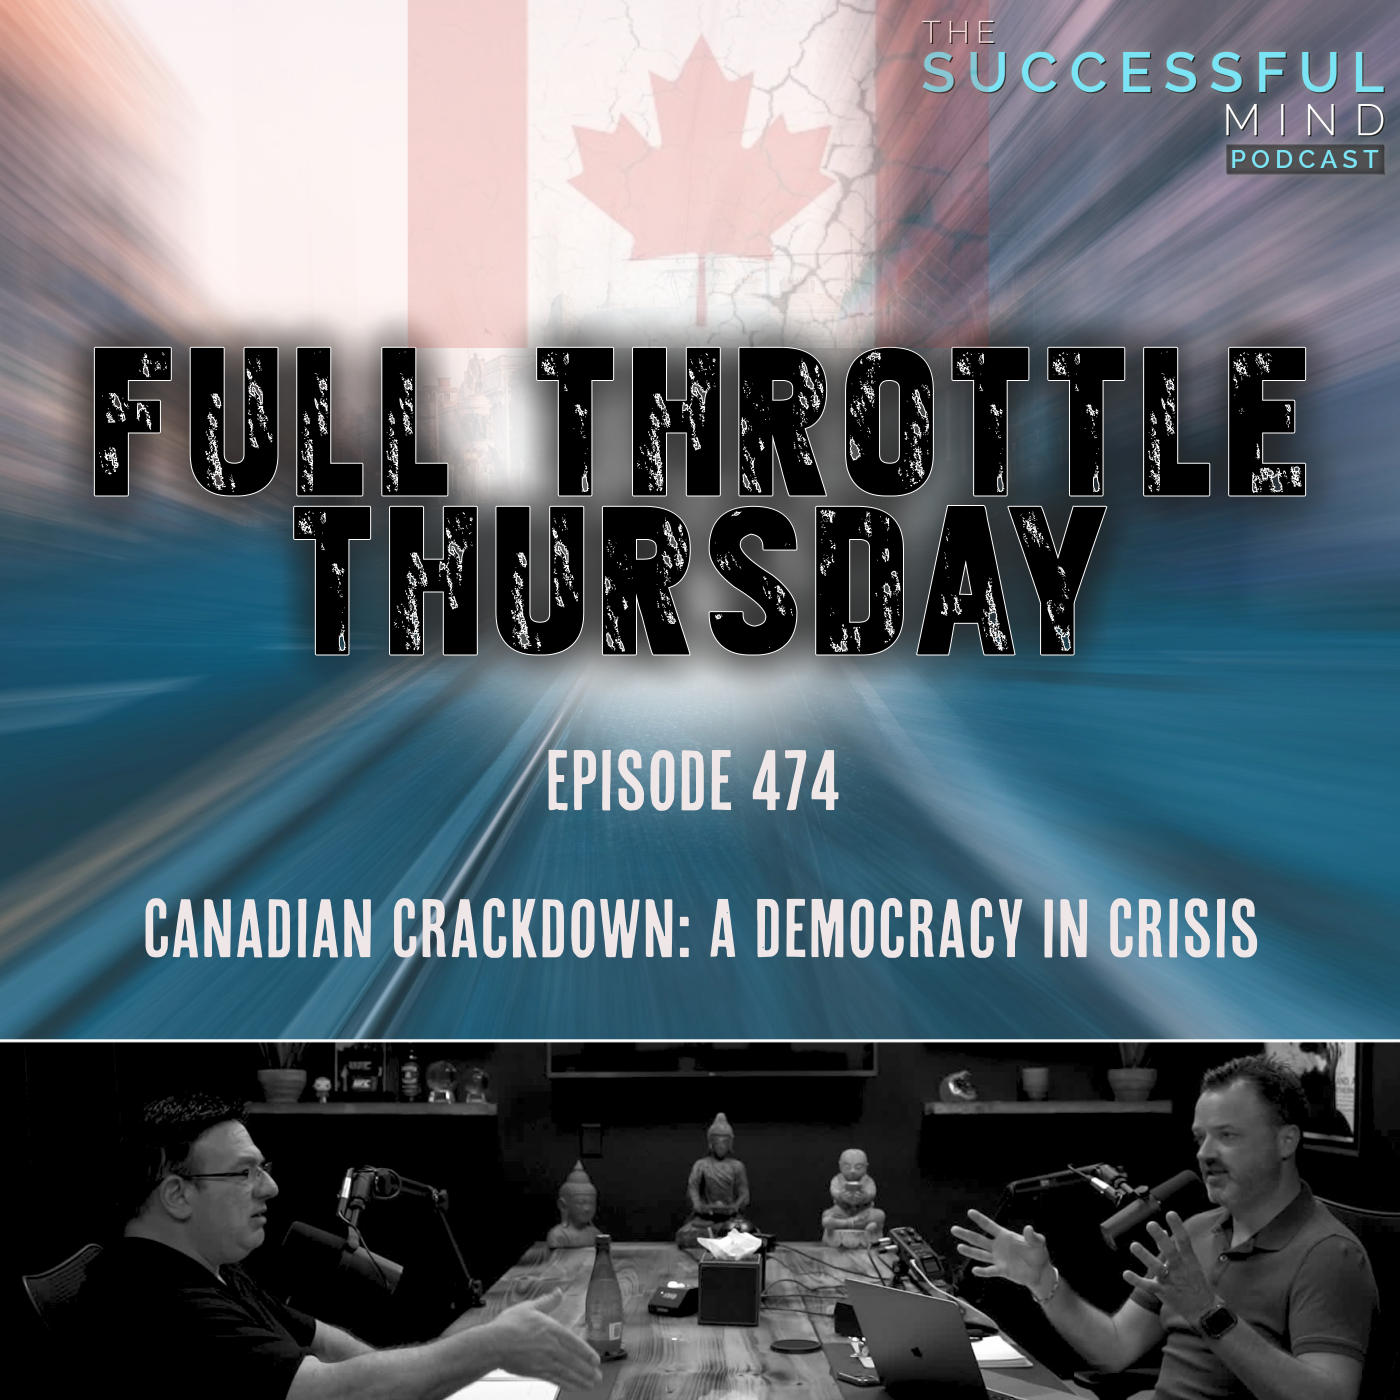 The Successful Mind Podcast - Full Throttle Thursday - Canadian Crackdown: A Democracy in Crisis